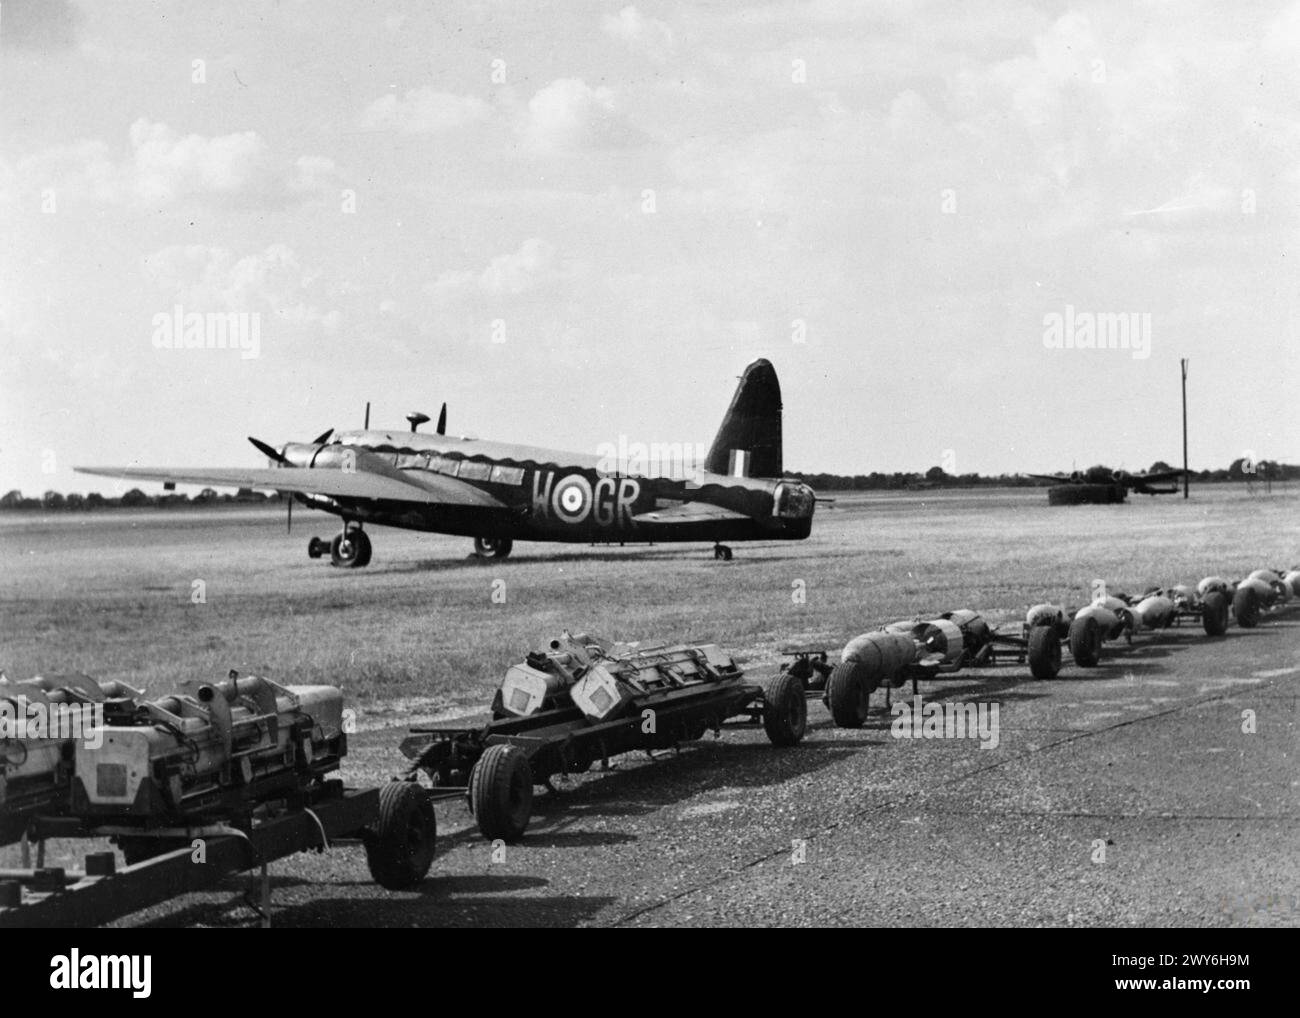 THE POLISH AIR FORCE IN BRITAIN, 1940-1947 - W5690 saw further service with No. 103 Squadron RAF, and Nos. 20 and 15 Operational Training Units, until it crash-landed while circuiting Hampstead Norreys, Berkshire, on 16 November 1943. Vickers Wellington B Mark IC (W5690, GR-W) of No. 301 Polish Bomber Squadron awaits a mixed load of incendiaries and 500 pounds GP bombs on trolleys at RAF Hemswell before a night sortie over Germany, July 1941. , Polish Air Force, Polish Air Force, 301 'Land of Pomerania' Bomber Squadron Stock Photo